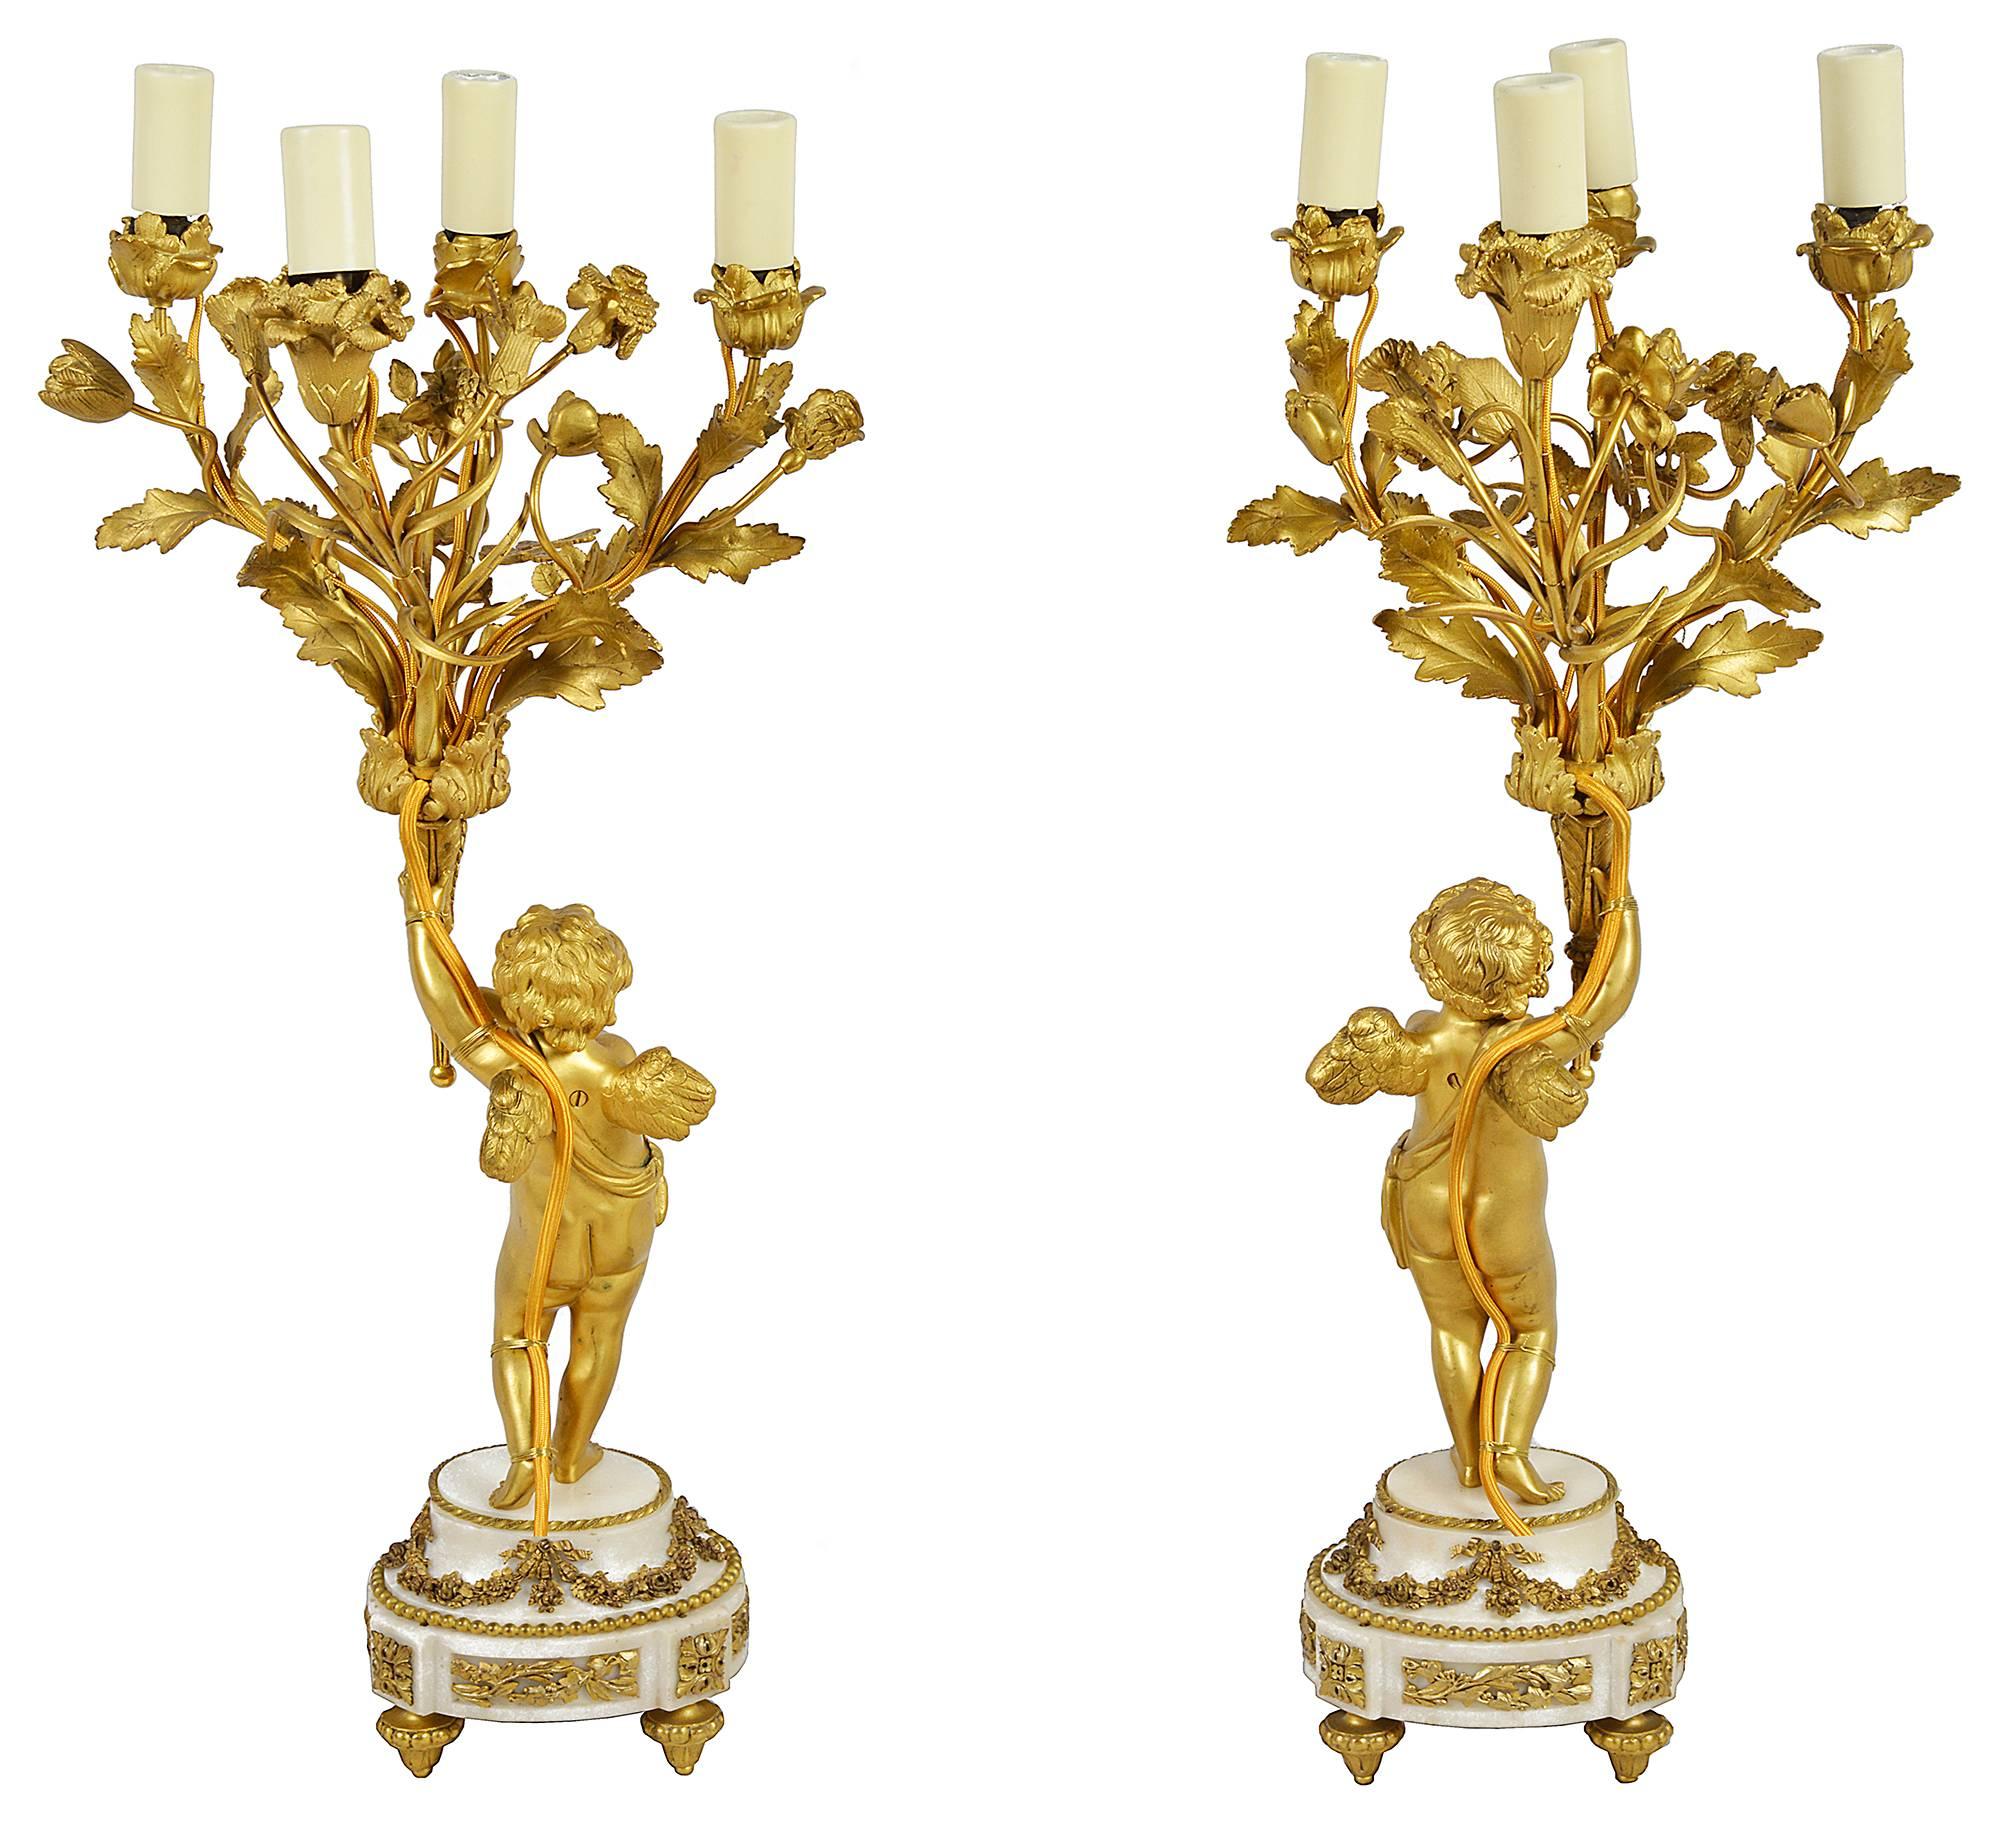 A good quality pair of 19th century gilded ormolu, Louis XVI style candelabra, each with cherubs mounted on white marble bases and holding four branch flower like candelabra.